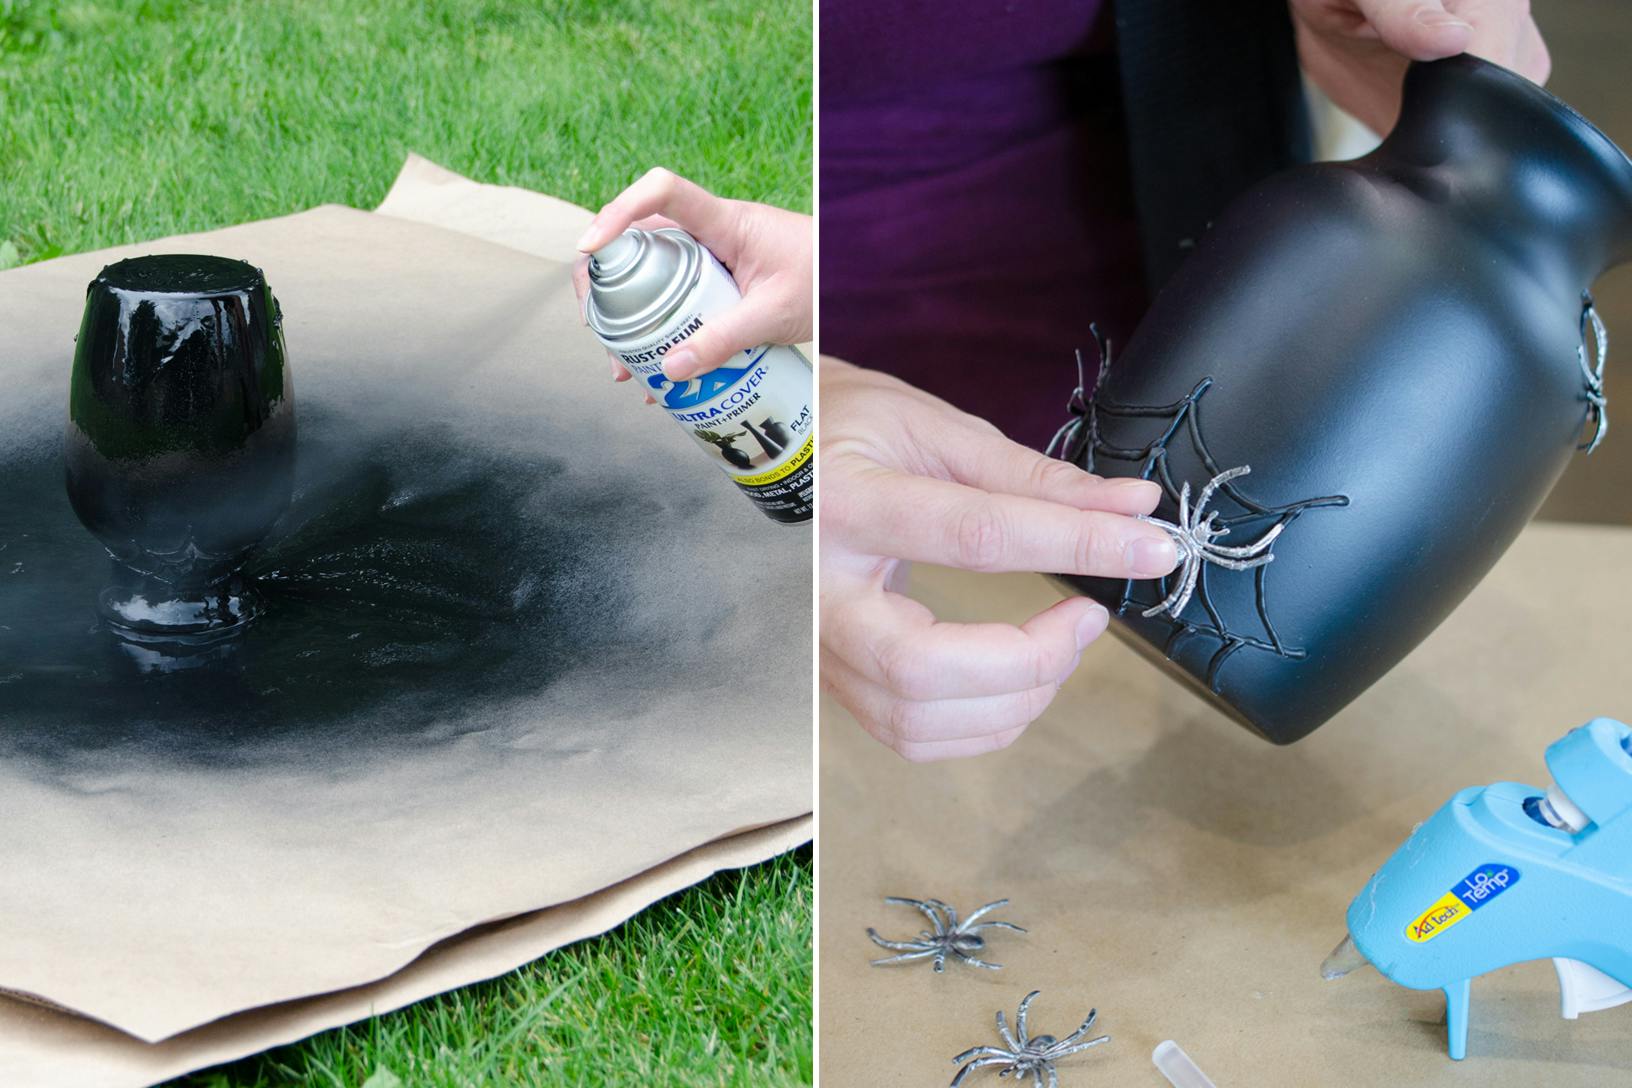 someone spray painting a vase black and sticking fake spiders on it